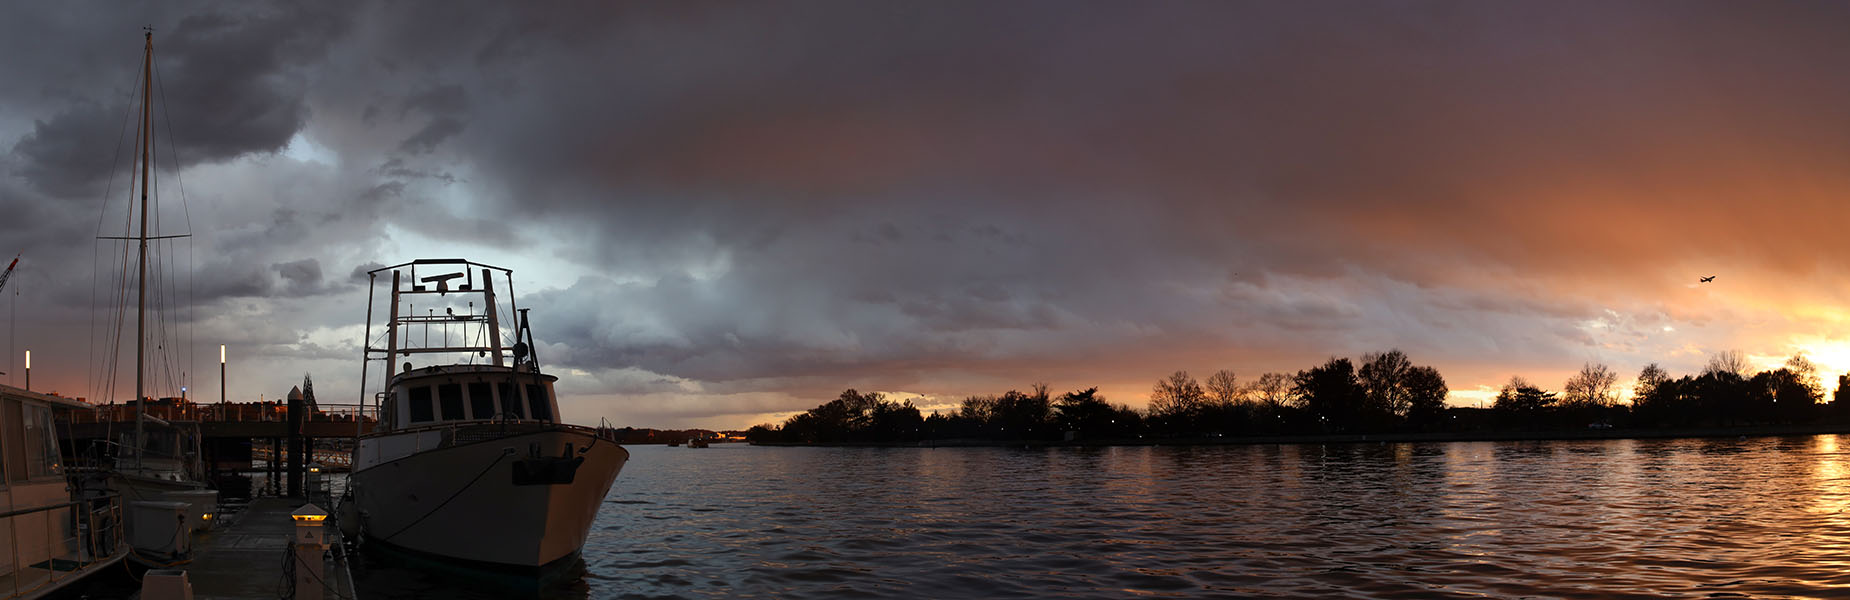 Panorama of Boat at Dock and Water at Sunset.